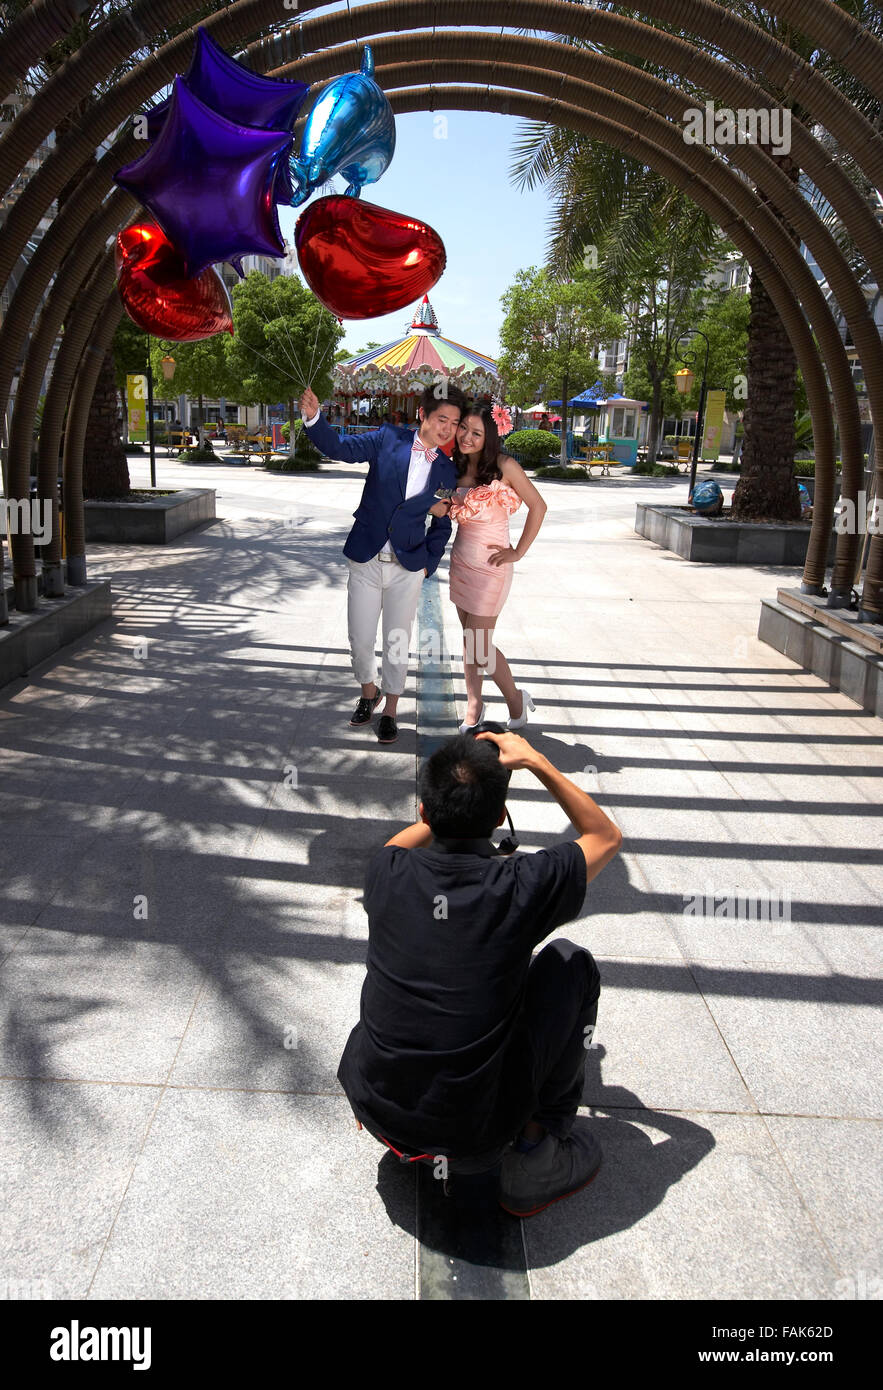 Vertical photo of young adult couple being photographed holding each other very closely with balloons. Stock Photo